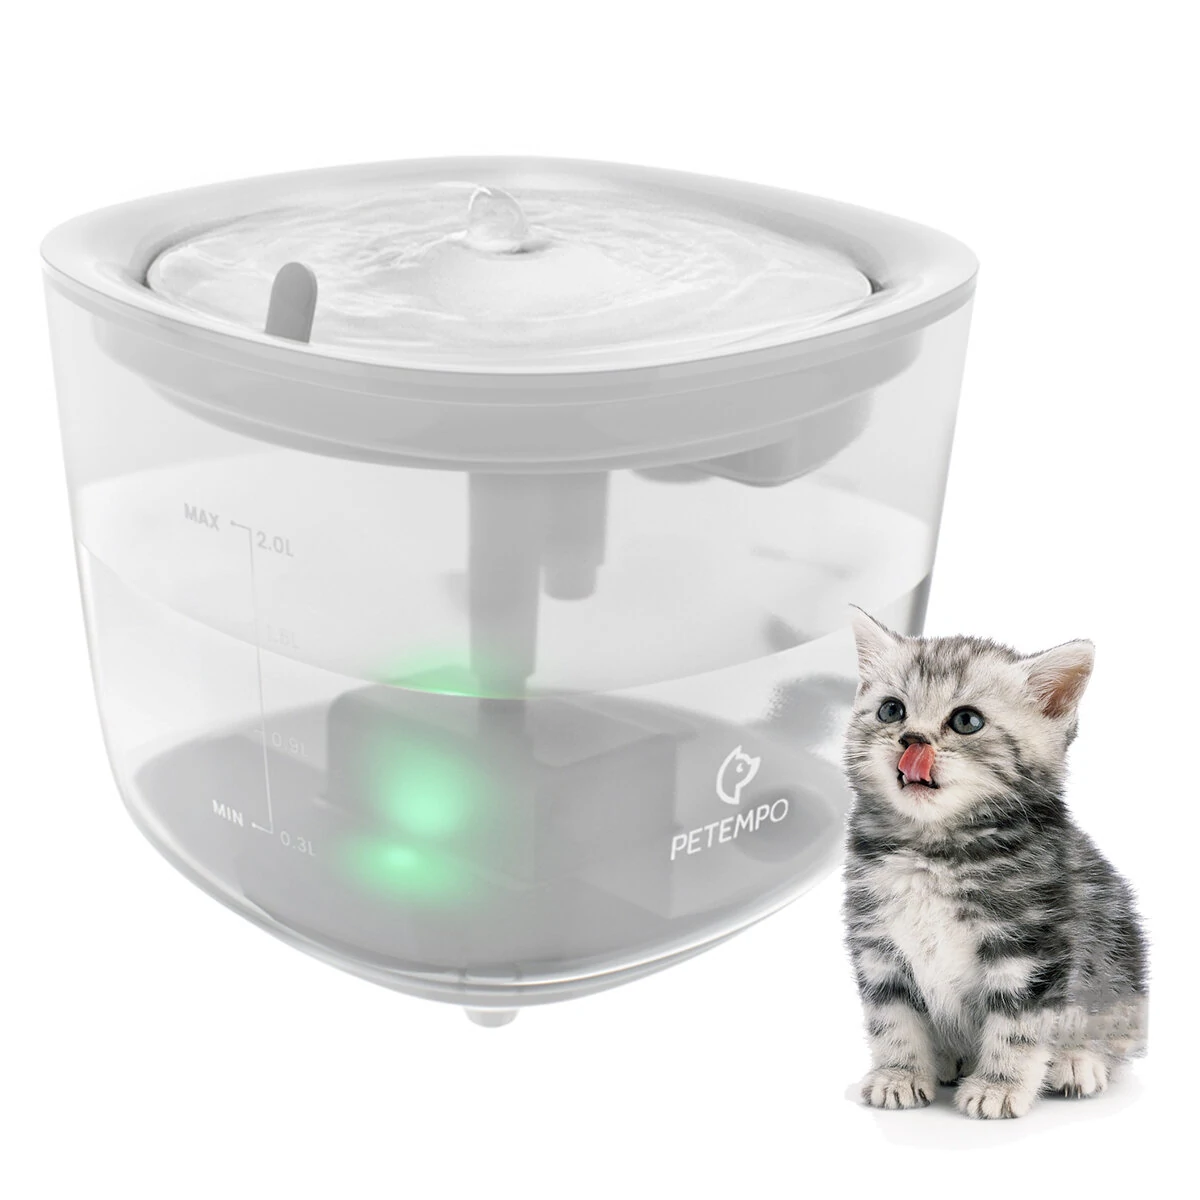 Petempo cat water fountain, wireless cat water fountain with led light, 2l ultra quiet cat water dispenser, automatic cat dog water fountain with water level window